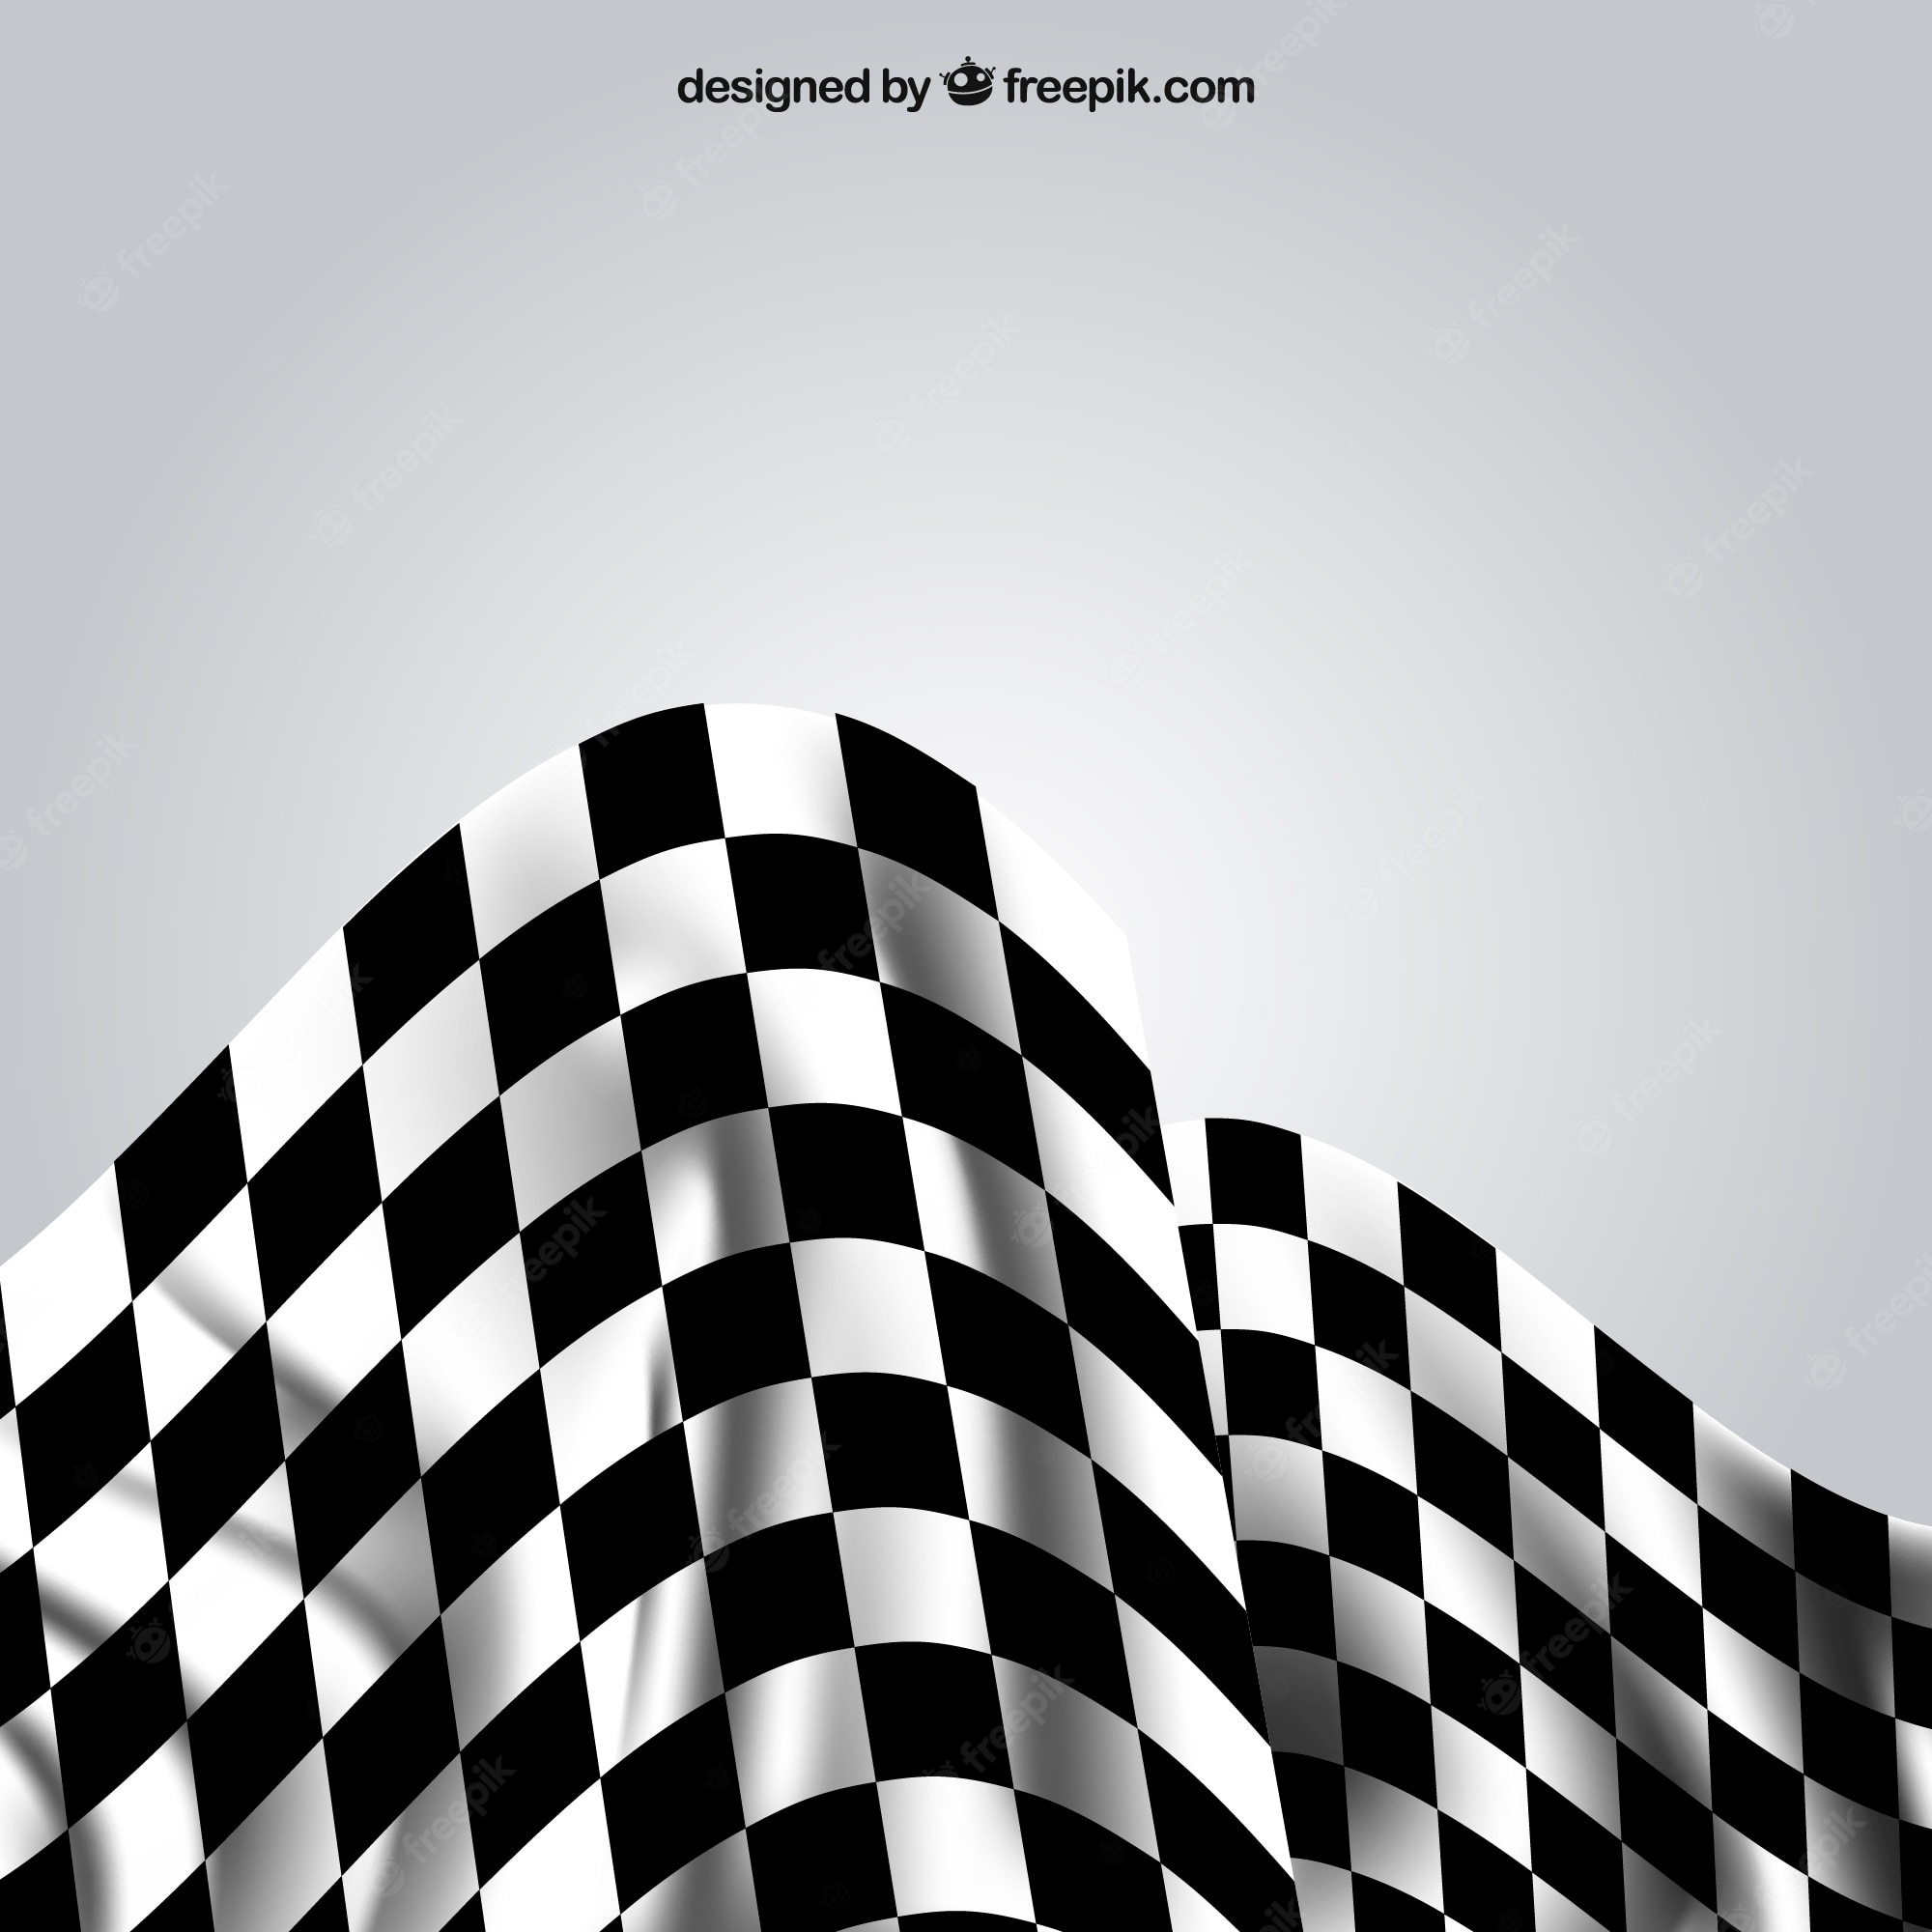 Black And White Flag Image. Free Vectors, & PSD